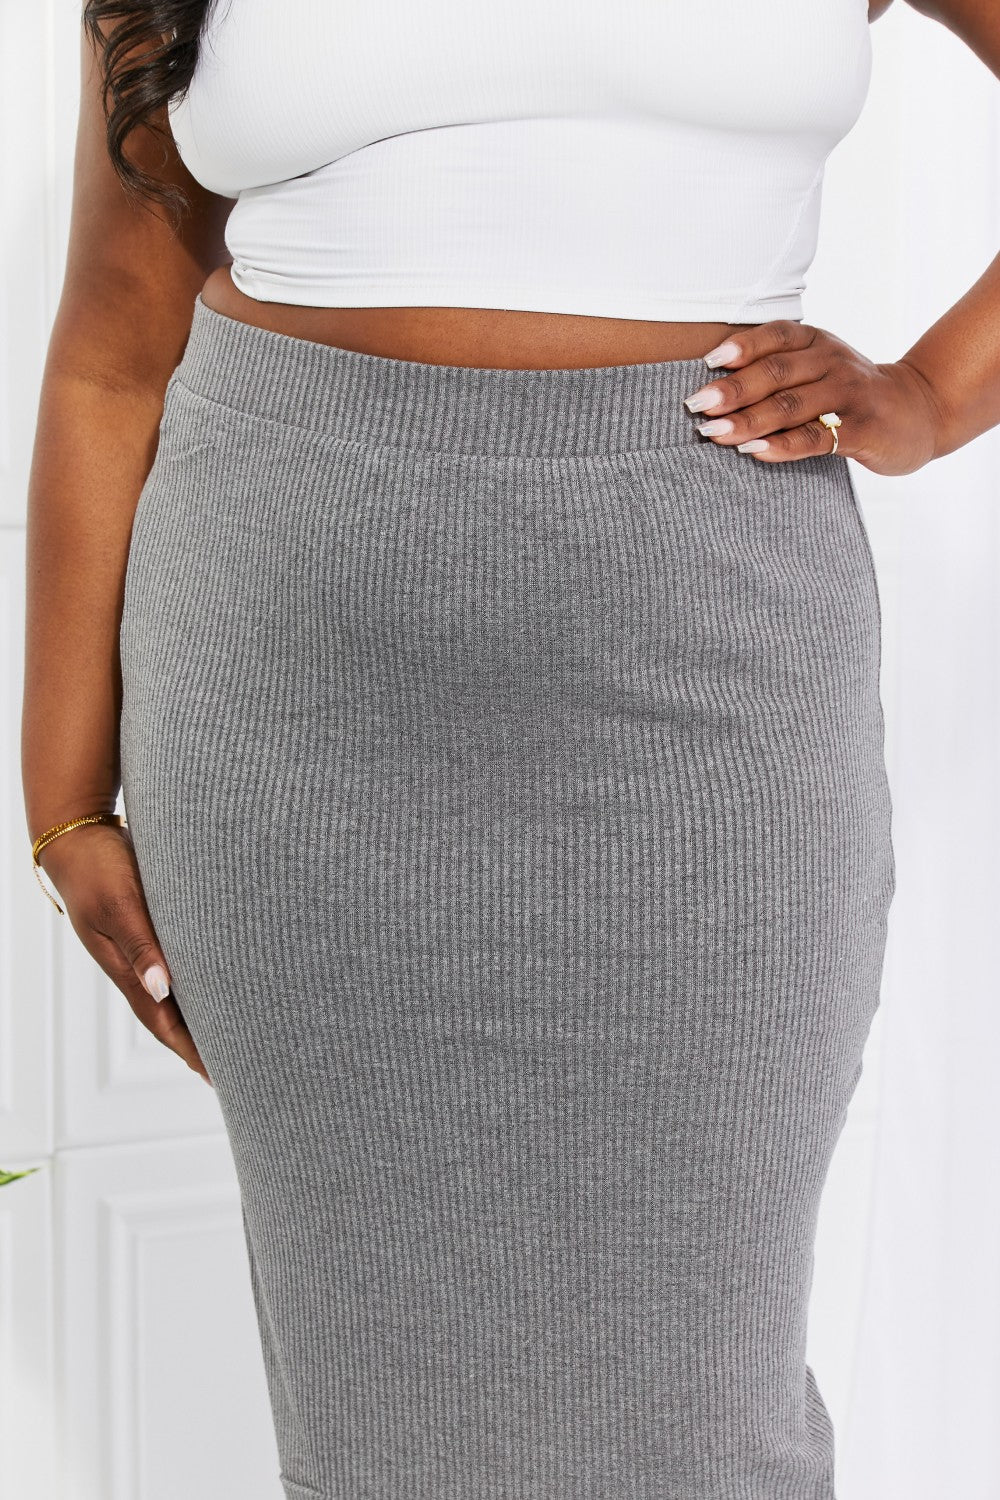 Zenana Full Size Effortless Class Ribbed Midi Skirt - Cheeky Chic Boutique